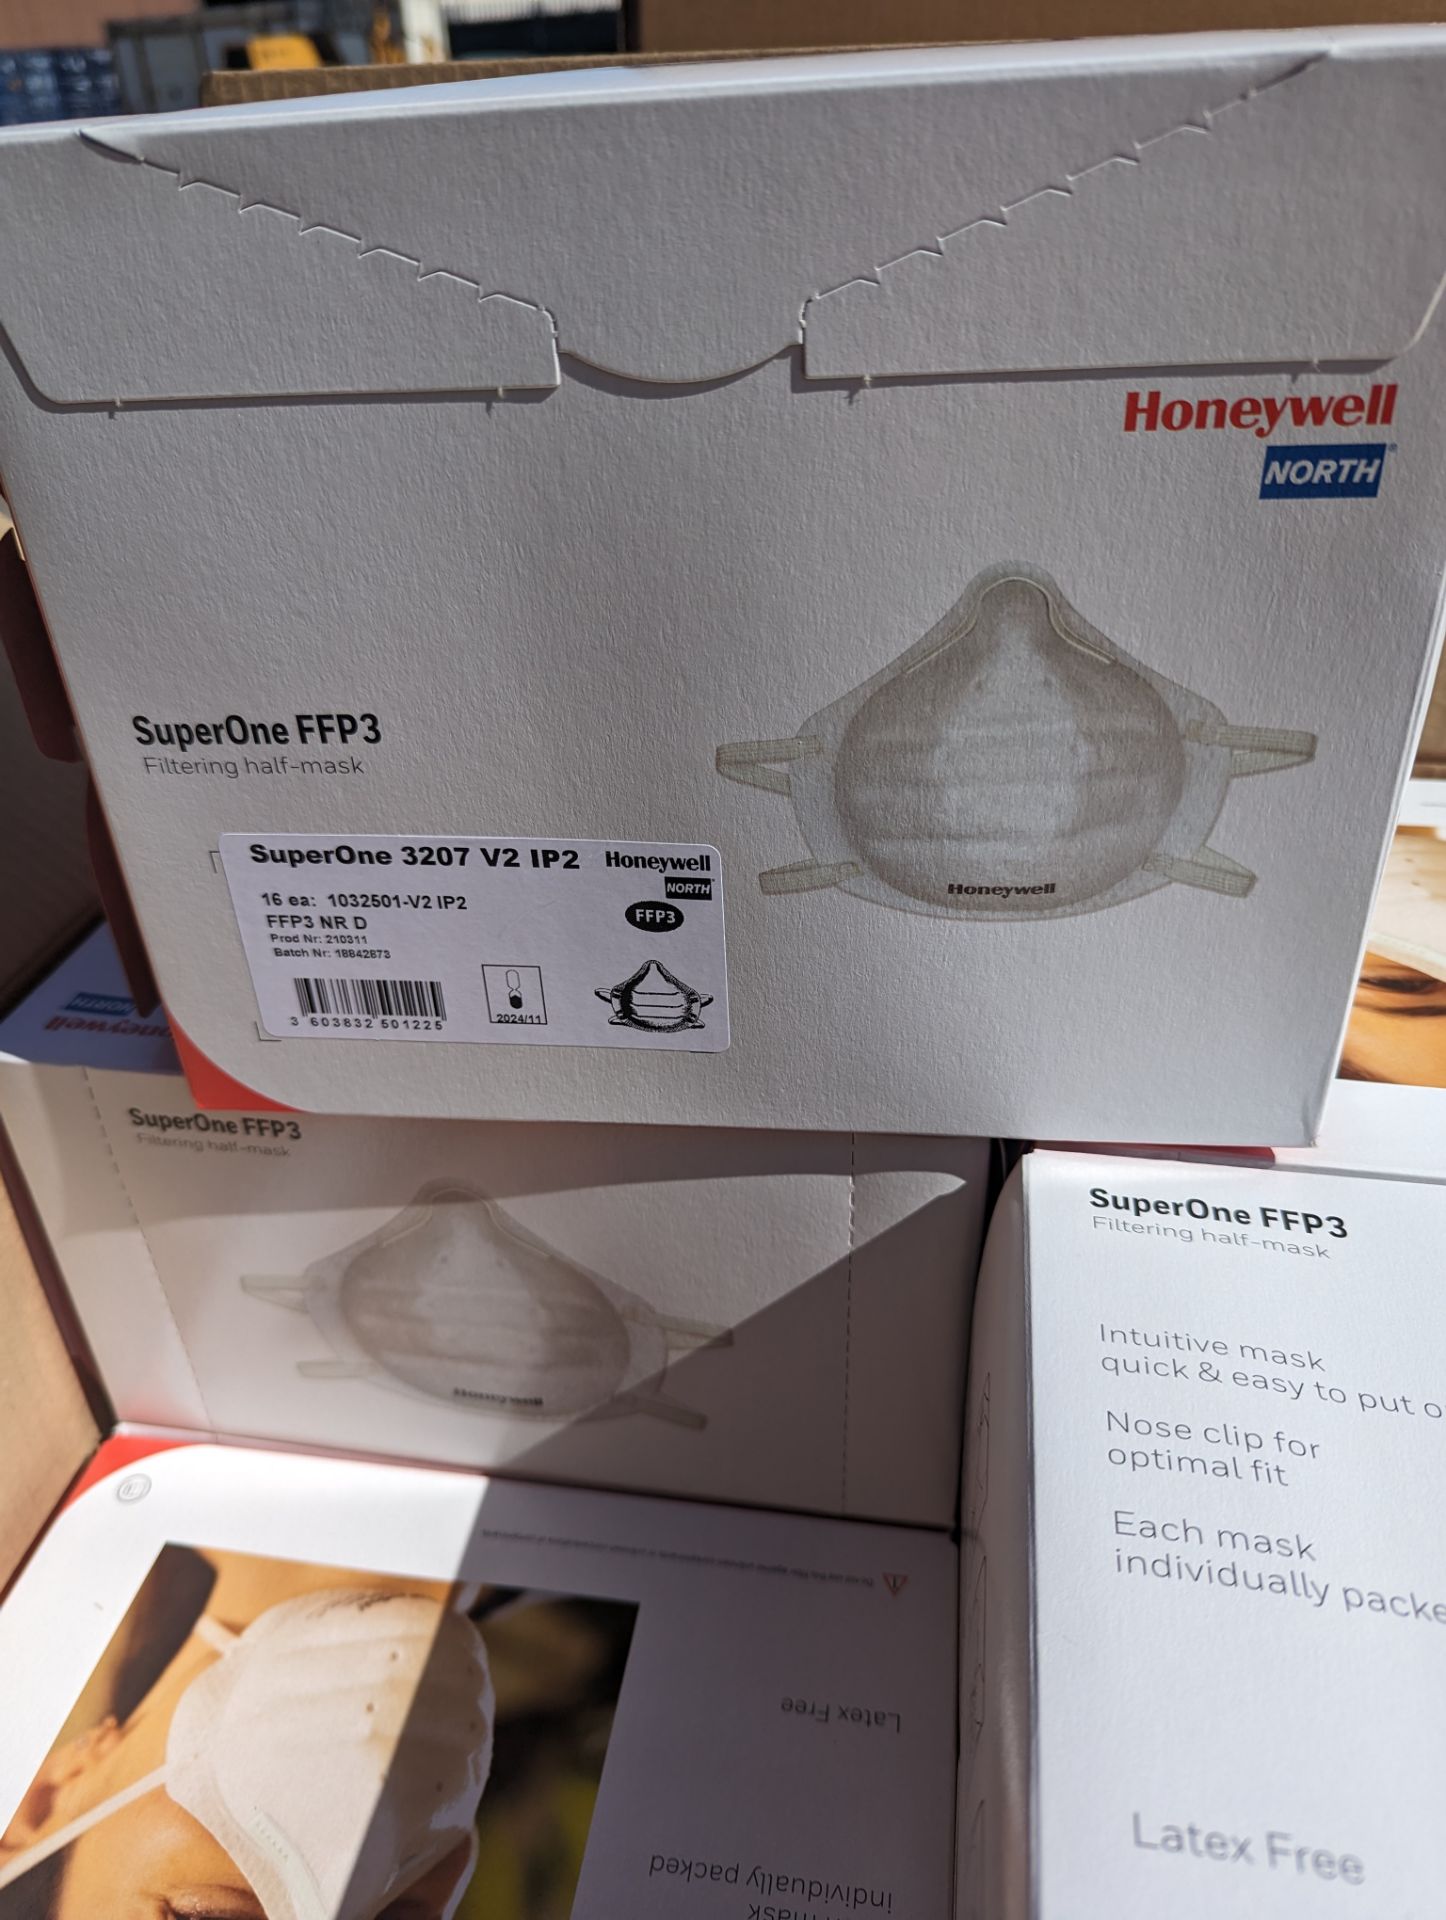 4x Boxes Honeywell SuperOne V2 ip2 FFP3 Half Mask Filter, Box of 12 Packs of 16 - Image 3 of 6